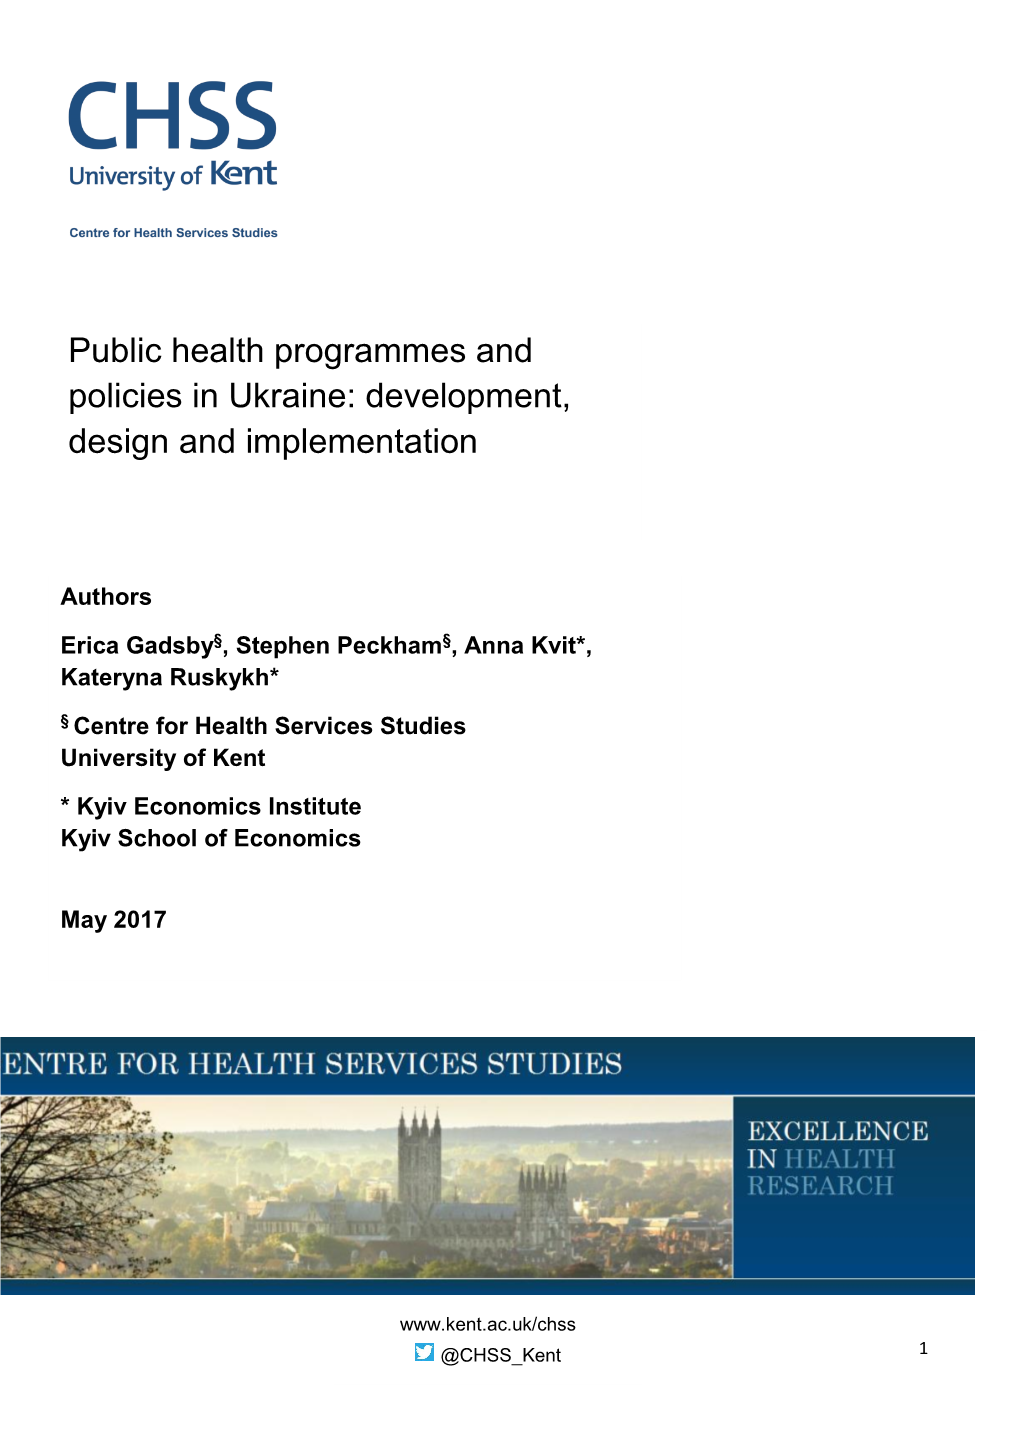 Public Health Programmes and Policies in Ukraine: Development, Design and Implementation